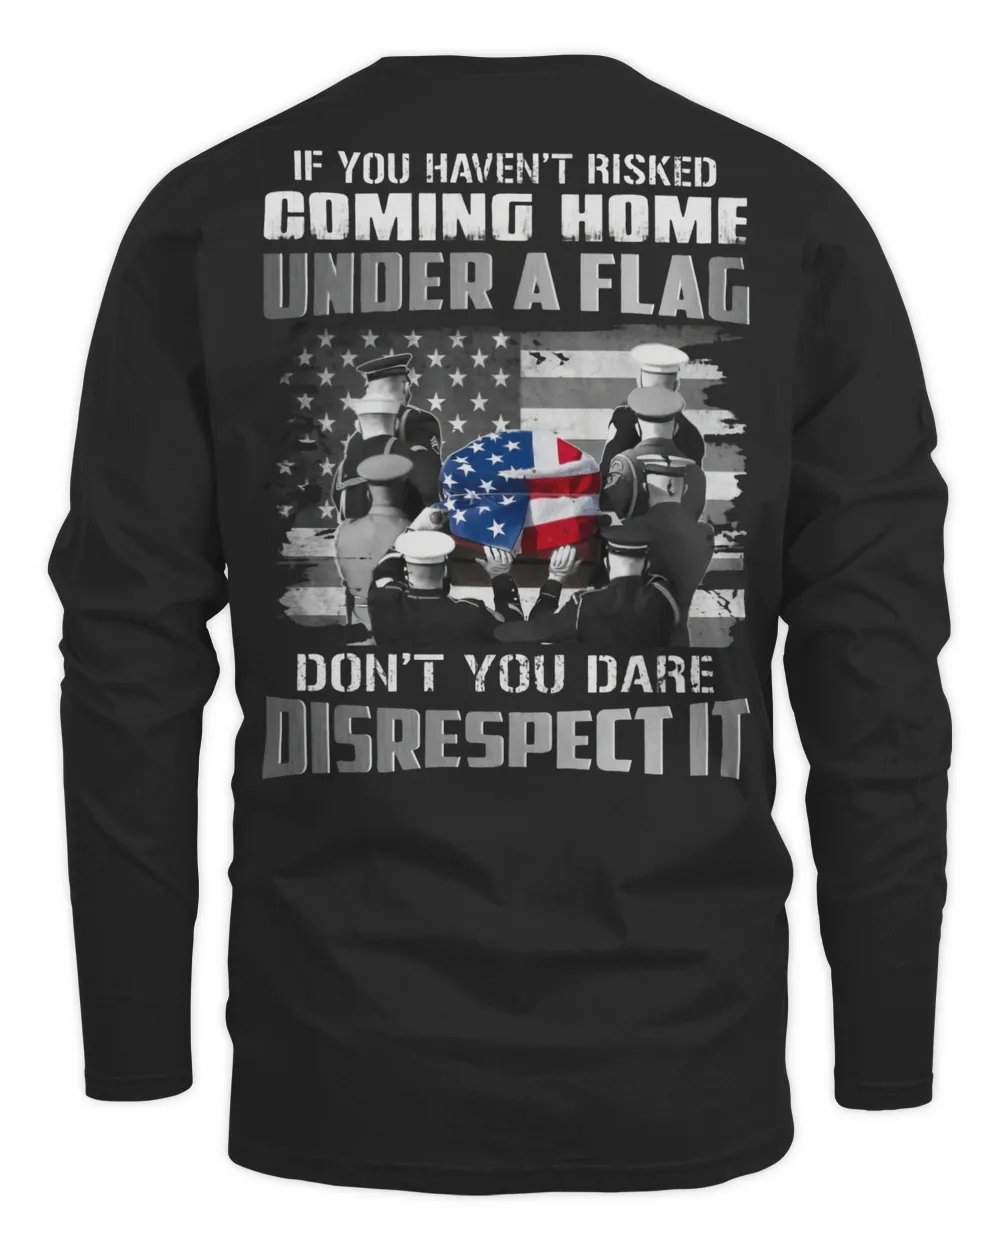 If You Haven't Risked Coming Home Under A Flag Don't You Dare Disrespect It